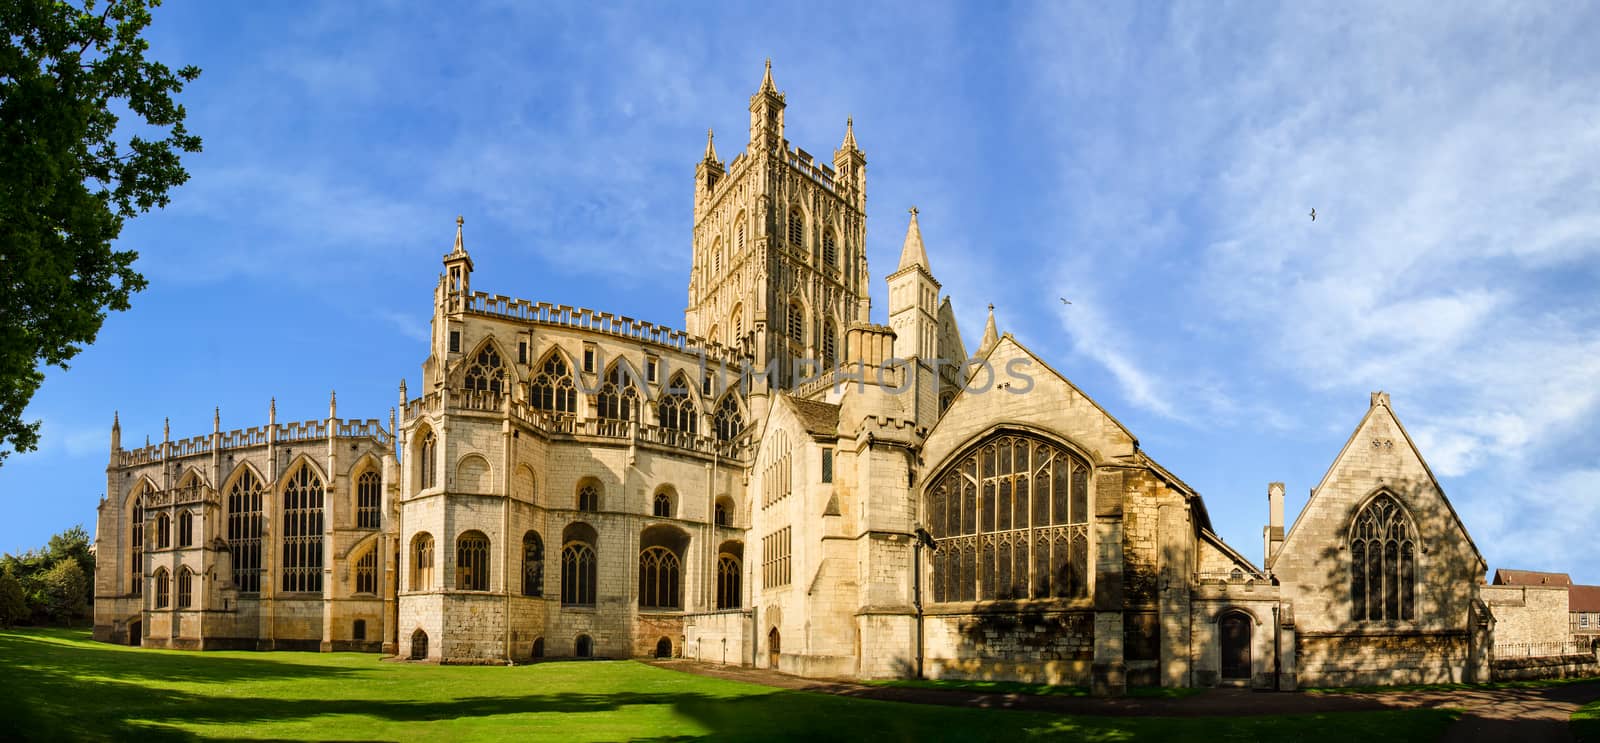 Panorama of Gloucester Cathedral by Valegorov